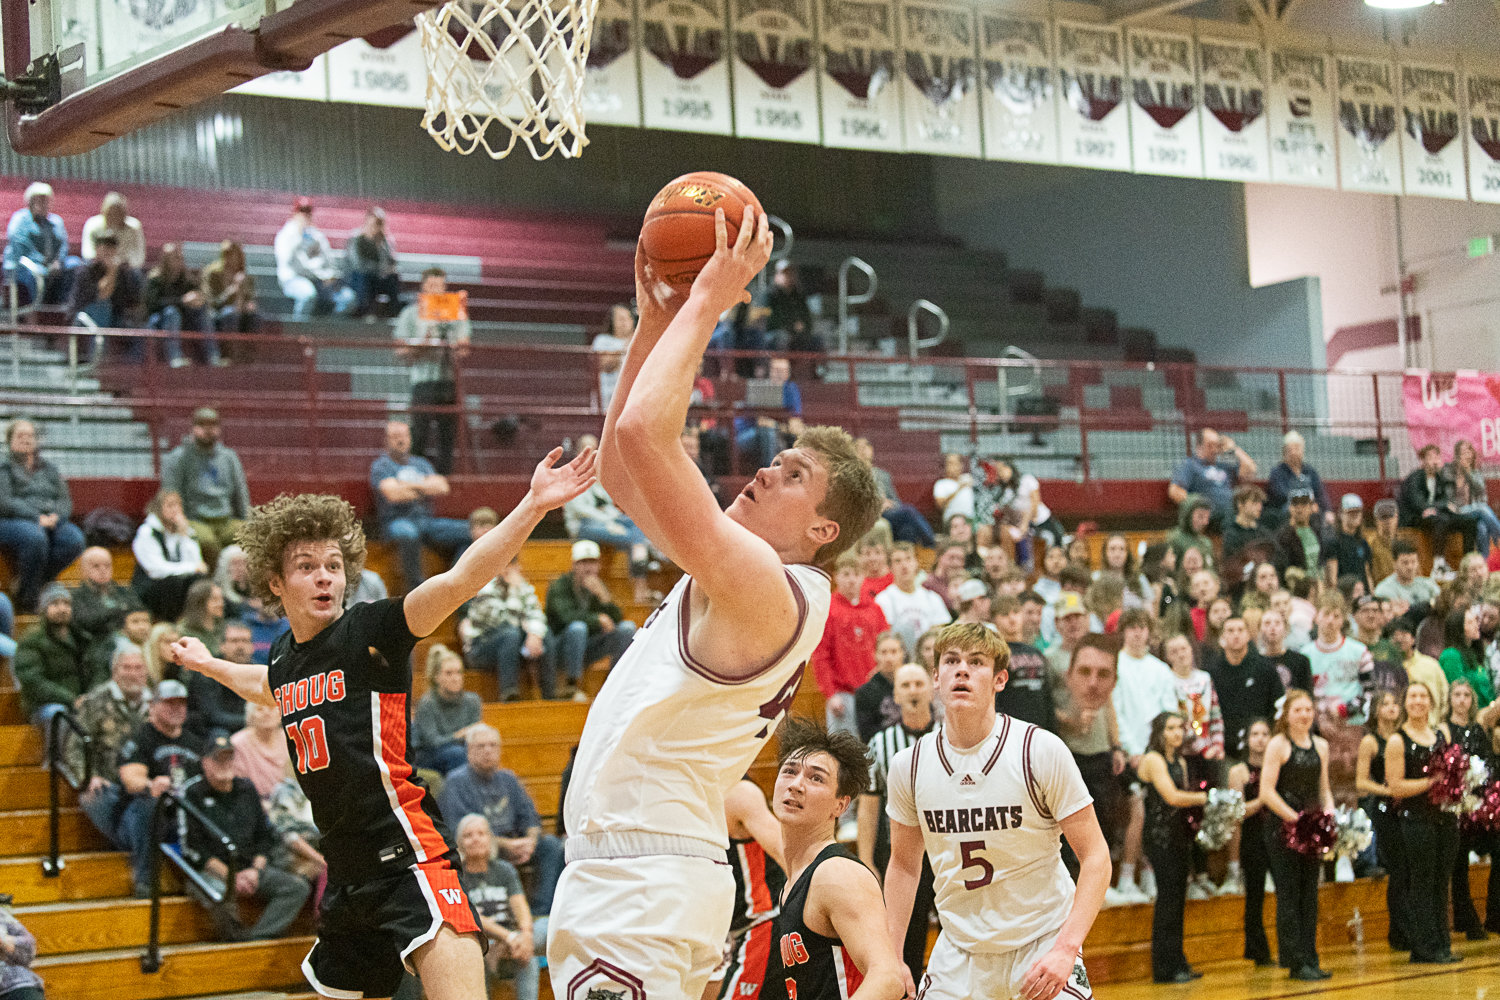 Soren Dalan watches a rebound into his hands during the first half of W.F. West's 73-53 win over Washougal on Dec. 20.